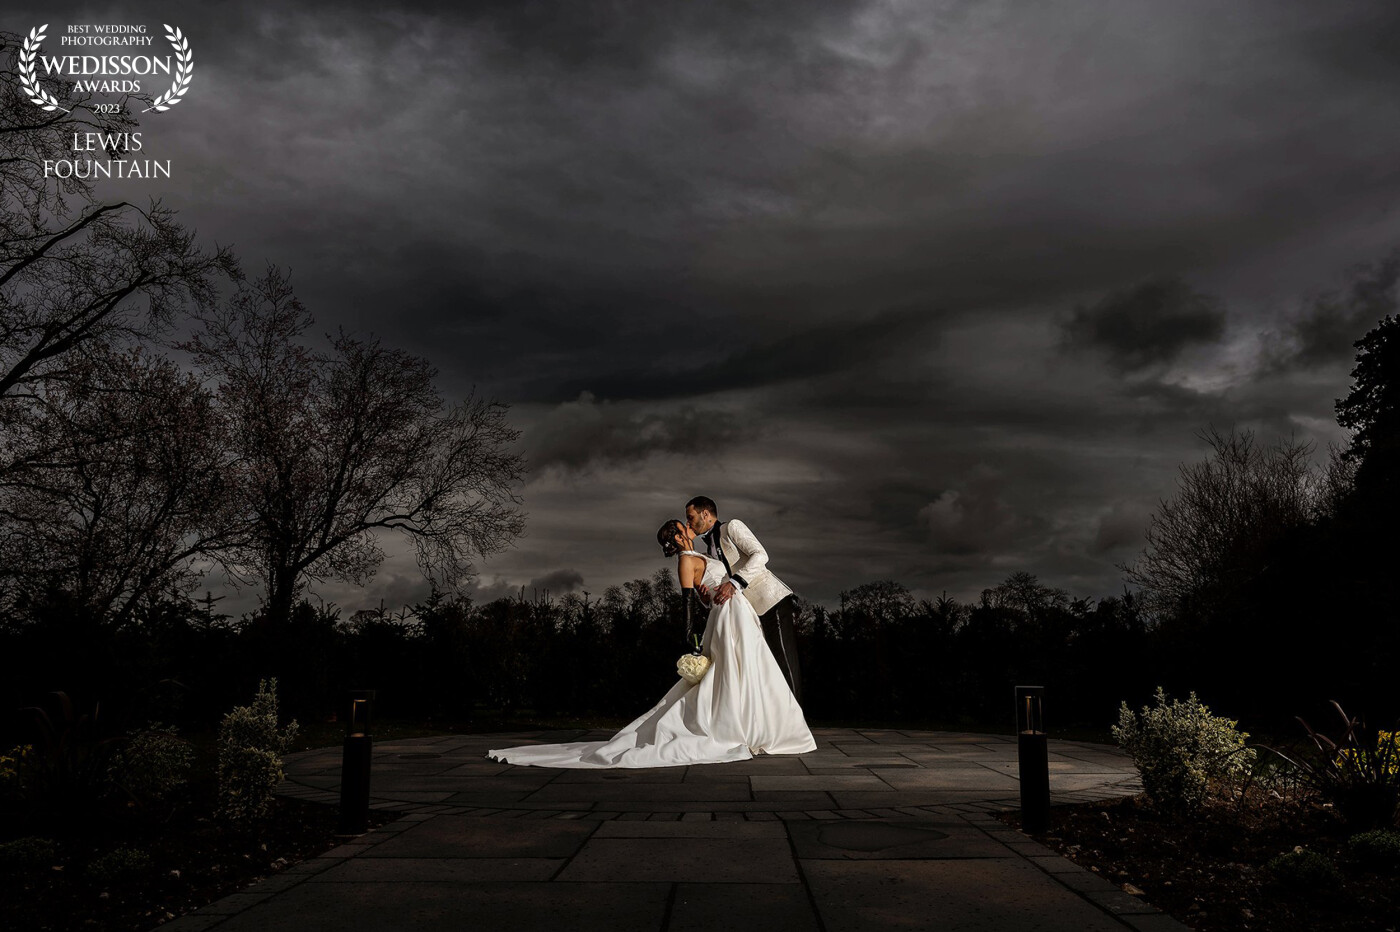 A black & white themed wedding could only be held at Swynford Manor near Newmarket, and when the storm clouds rolled in we couldn’t resist taking our bride & groom out in to the gardens, for some dramatic shots utilising the early evening light and our strobes.